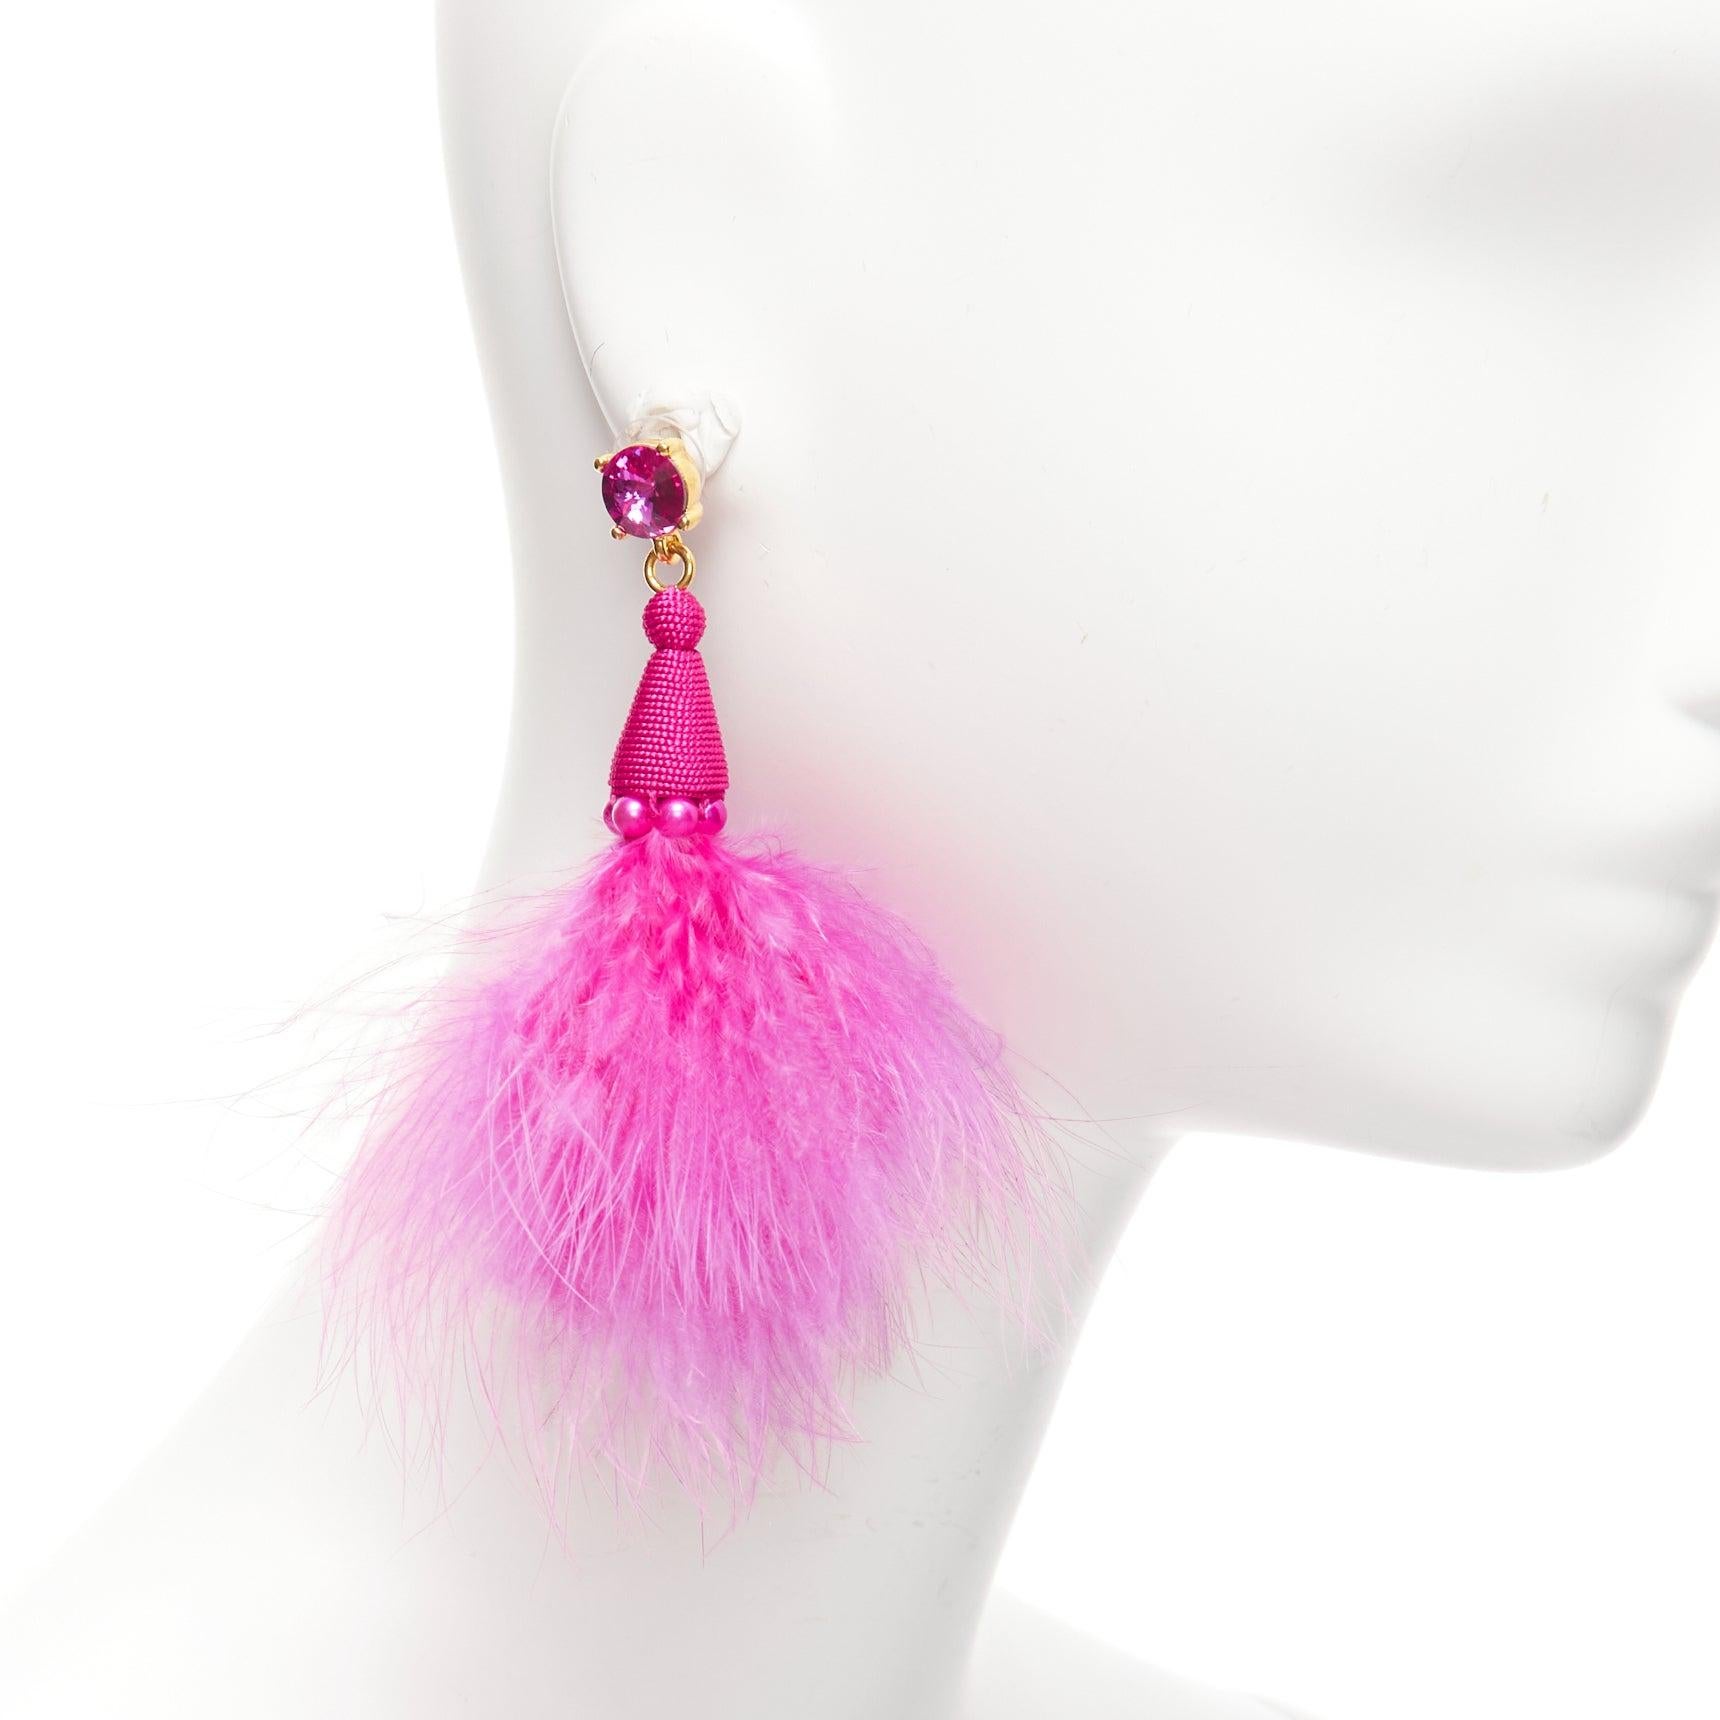 OSCAR DE LA RENTA hot pink ostrich feather bead crystal pin earrings pair
Reference: AAWC/A01054
Brand: Oscar de la Renta
Material: Metal, Feather, Acrylic
Color: Pink, Gold
Pattern: Solid
Closure: Pin
Lining: Gold Metal
Made in: